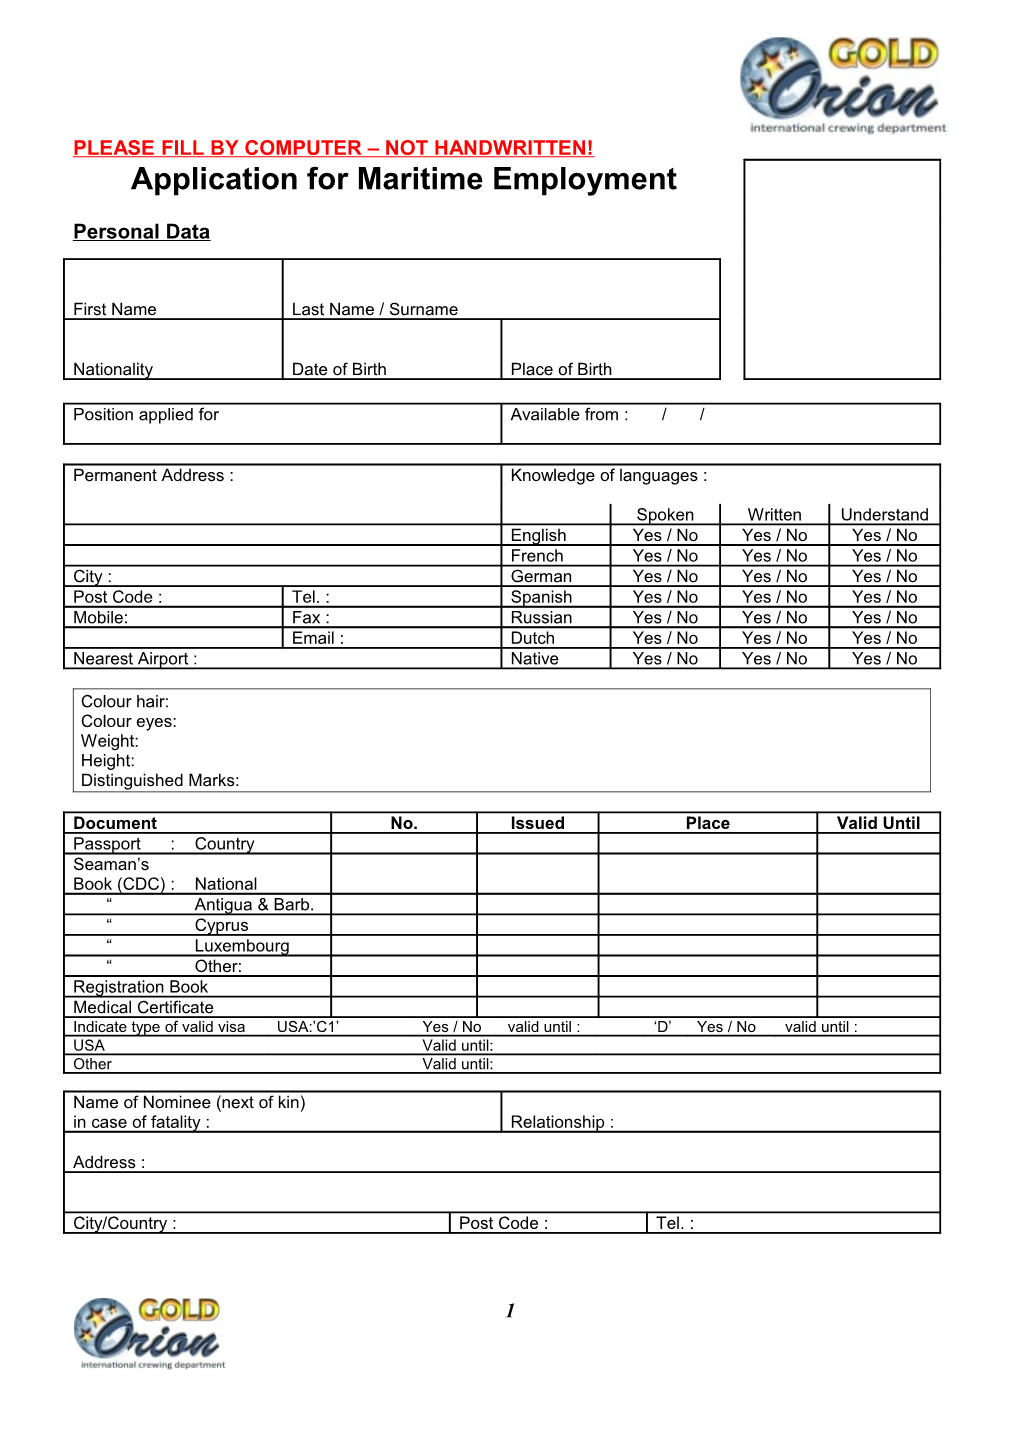 Application for Maritime Employment